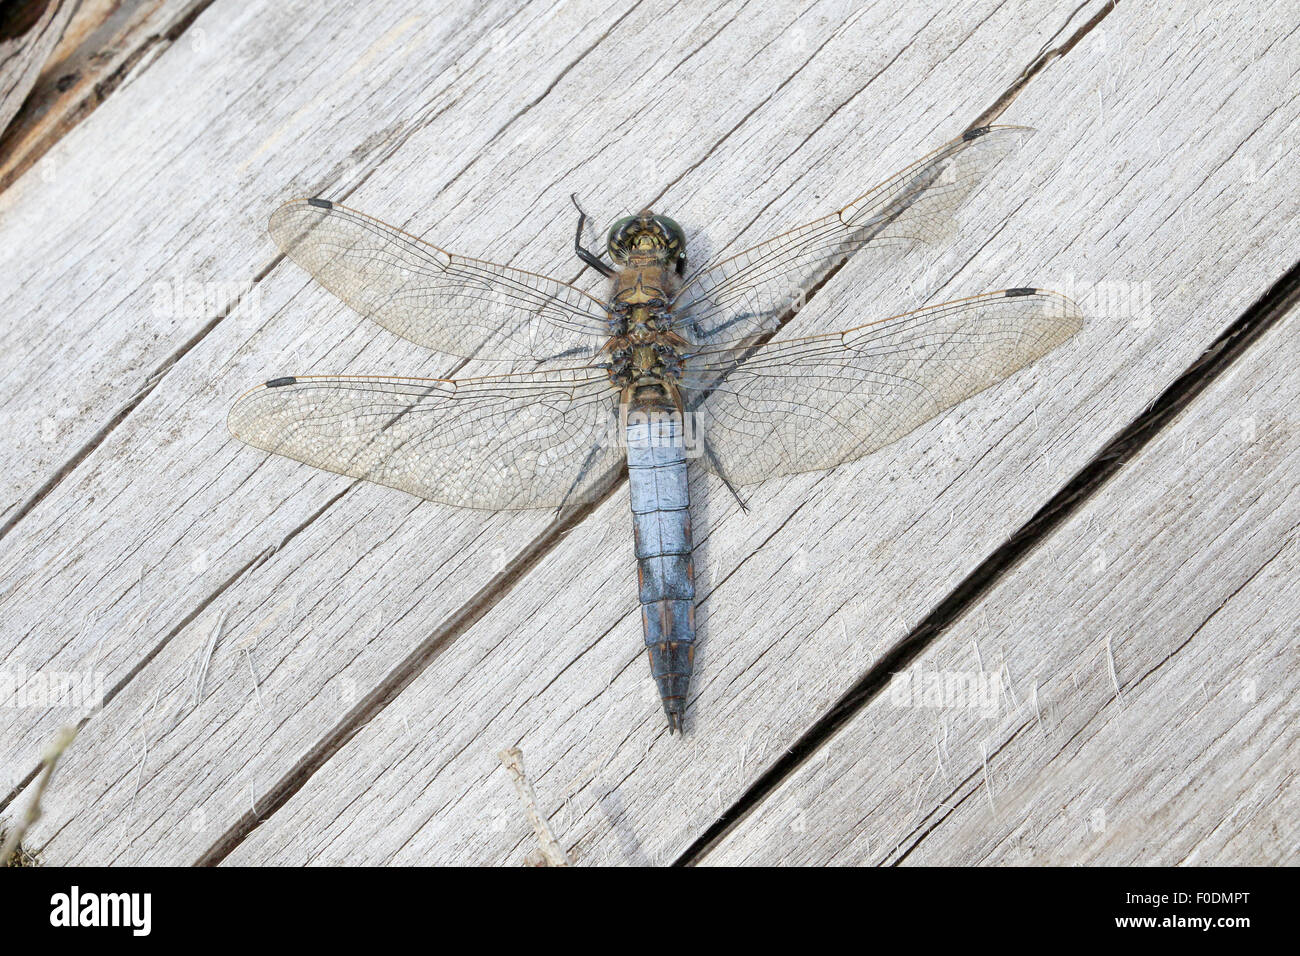 Mature Male Black Tailed Skimmer Dragonfly basking on a log Stock Photo